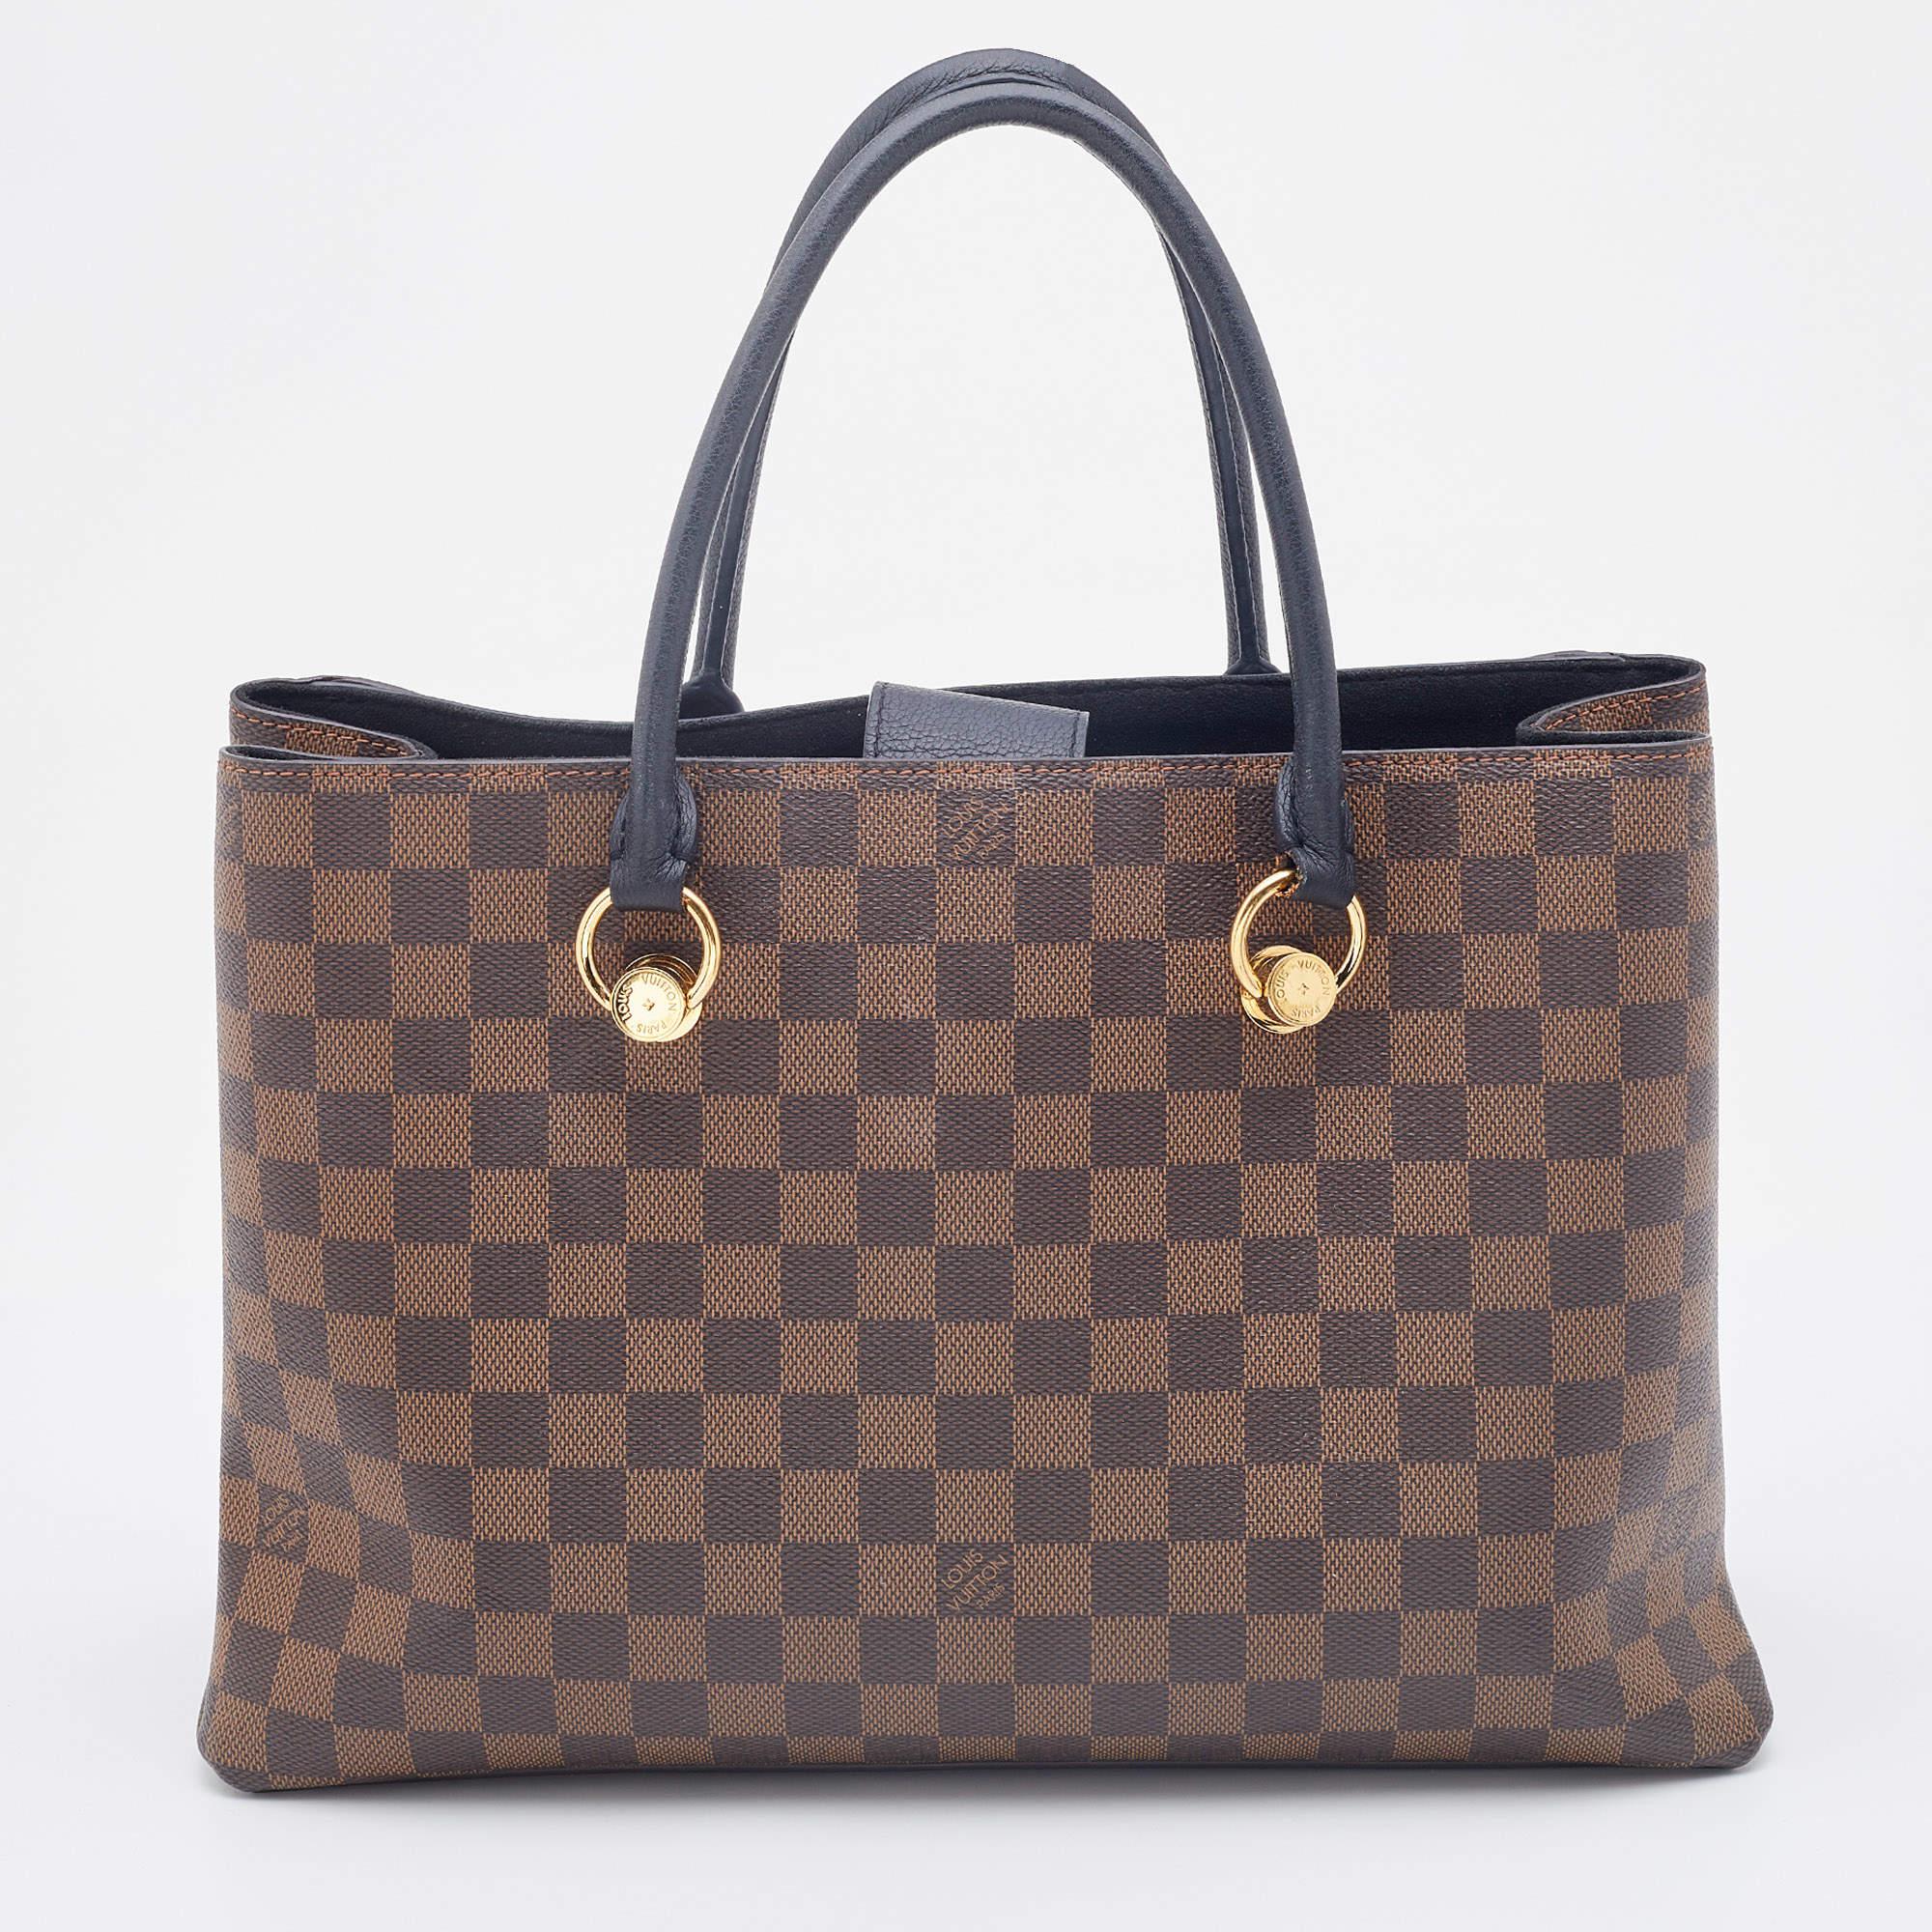 Have a finely crafted, timeless creation in your arm with this Louis Vuitton handbag. Known as the LV Riverside, the bag has a sleek shape and a functional quality. It is crafted from Damier Ebene canvas & leather and comes with a large LV logo